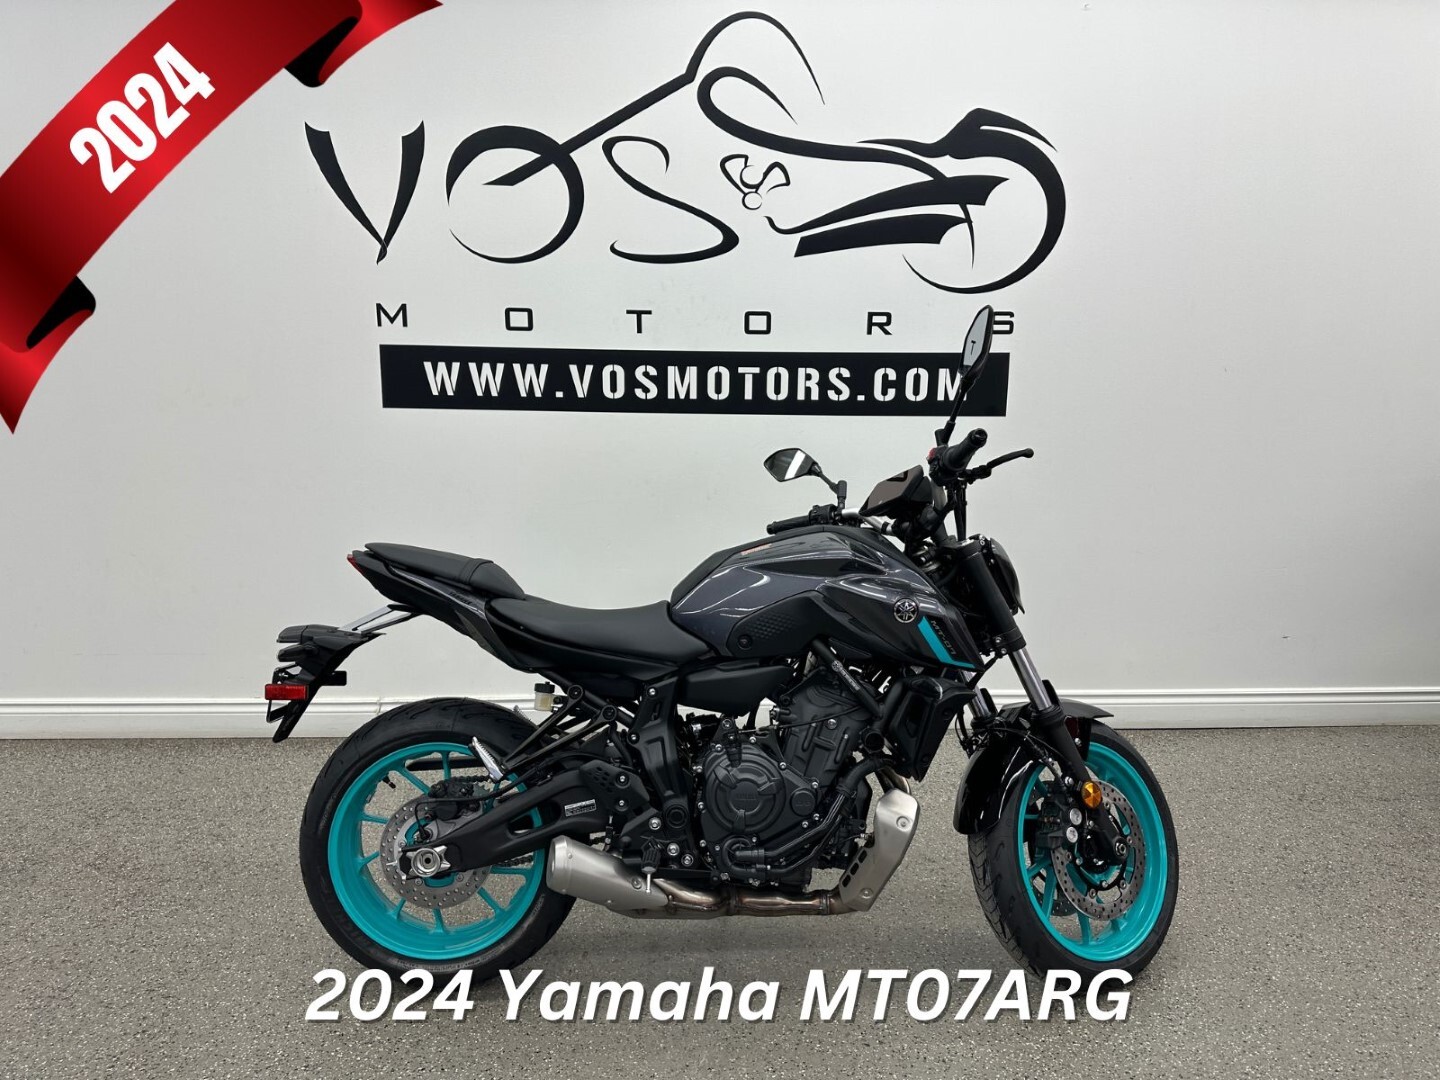 2024 Yamaha MT07ARG MT07ARG - V6015 - -No Payments for 1 Year**